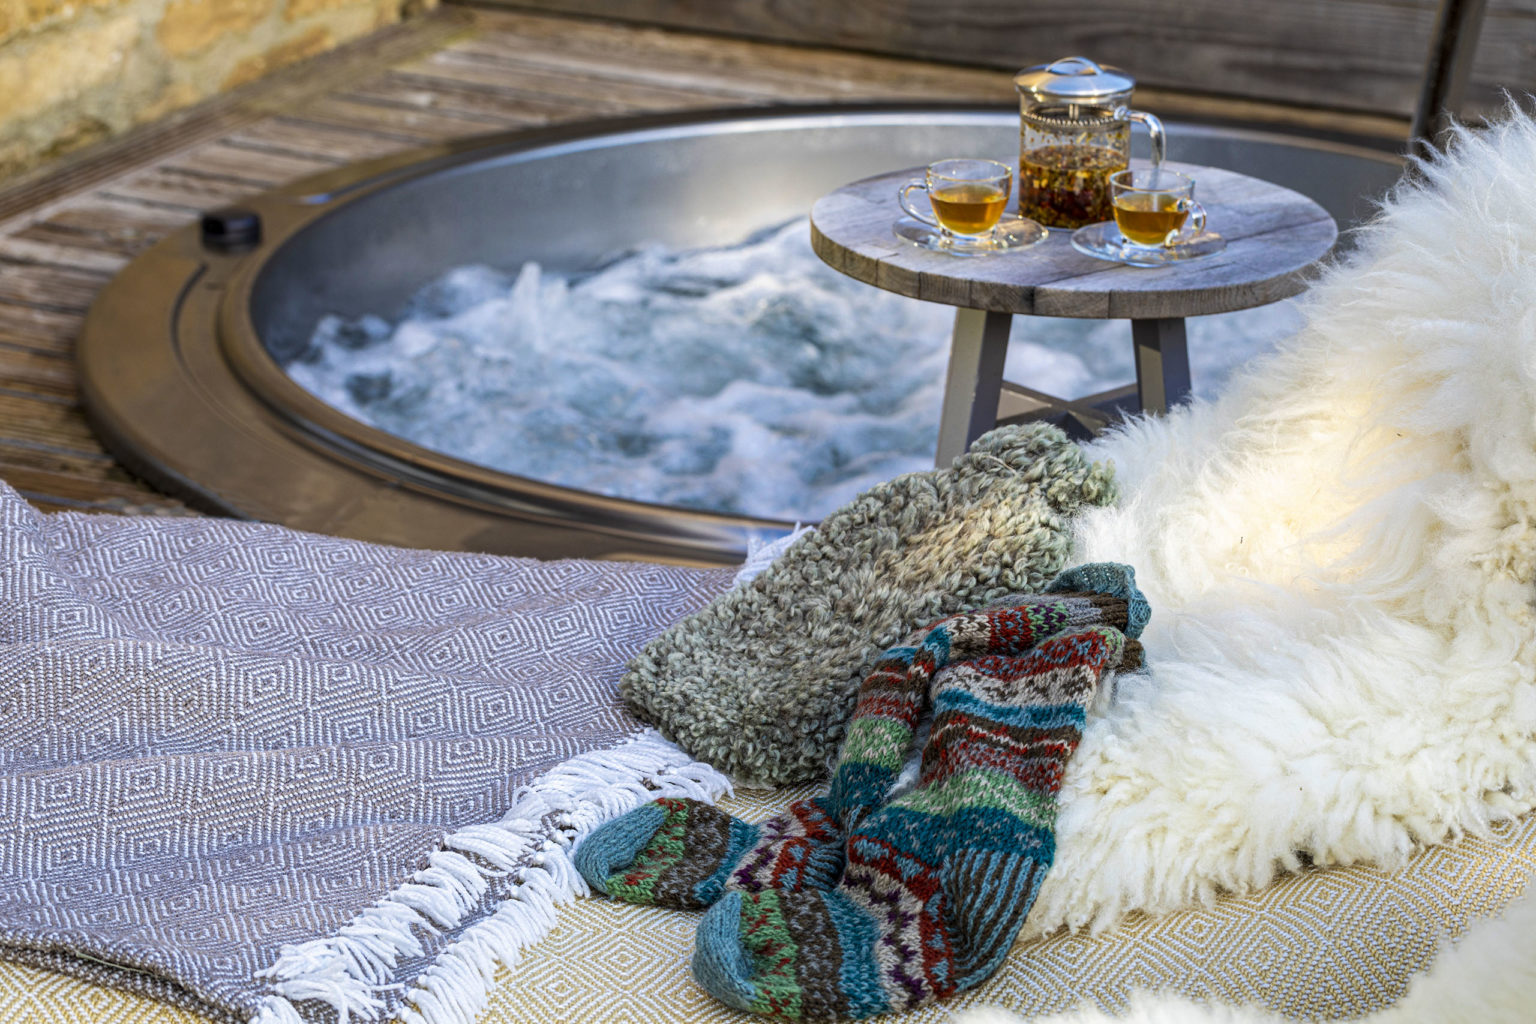 An outdoor hot tub, herbal tea and blankets at the spa in Swinton Country Club near Harrogate and Ripon